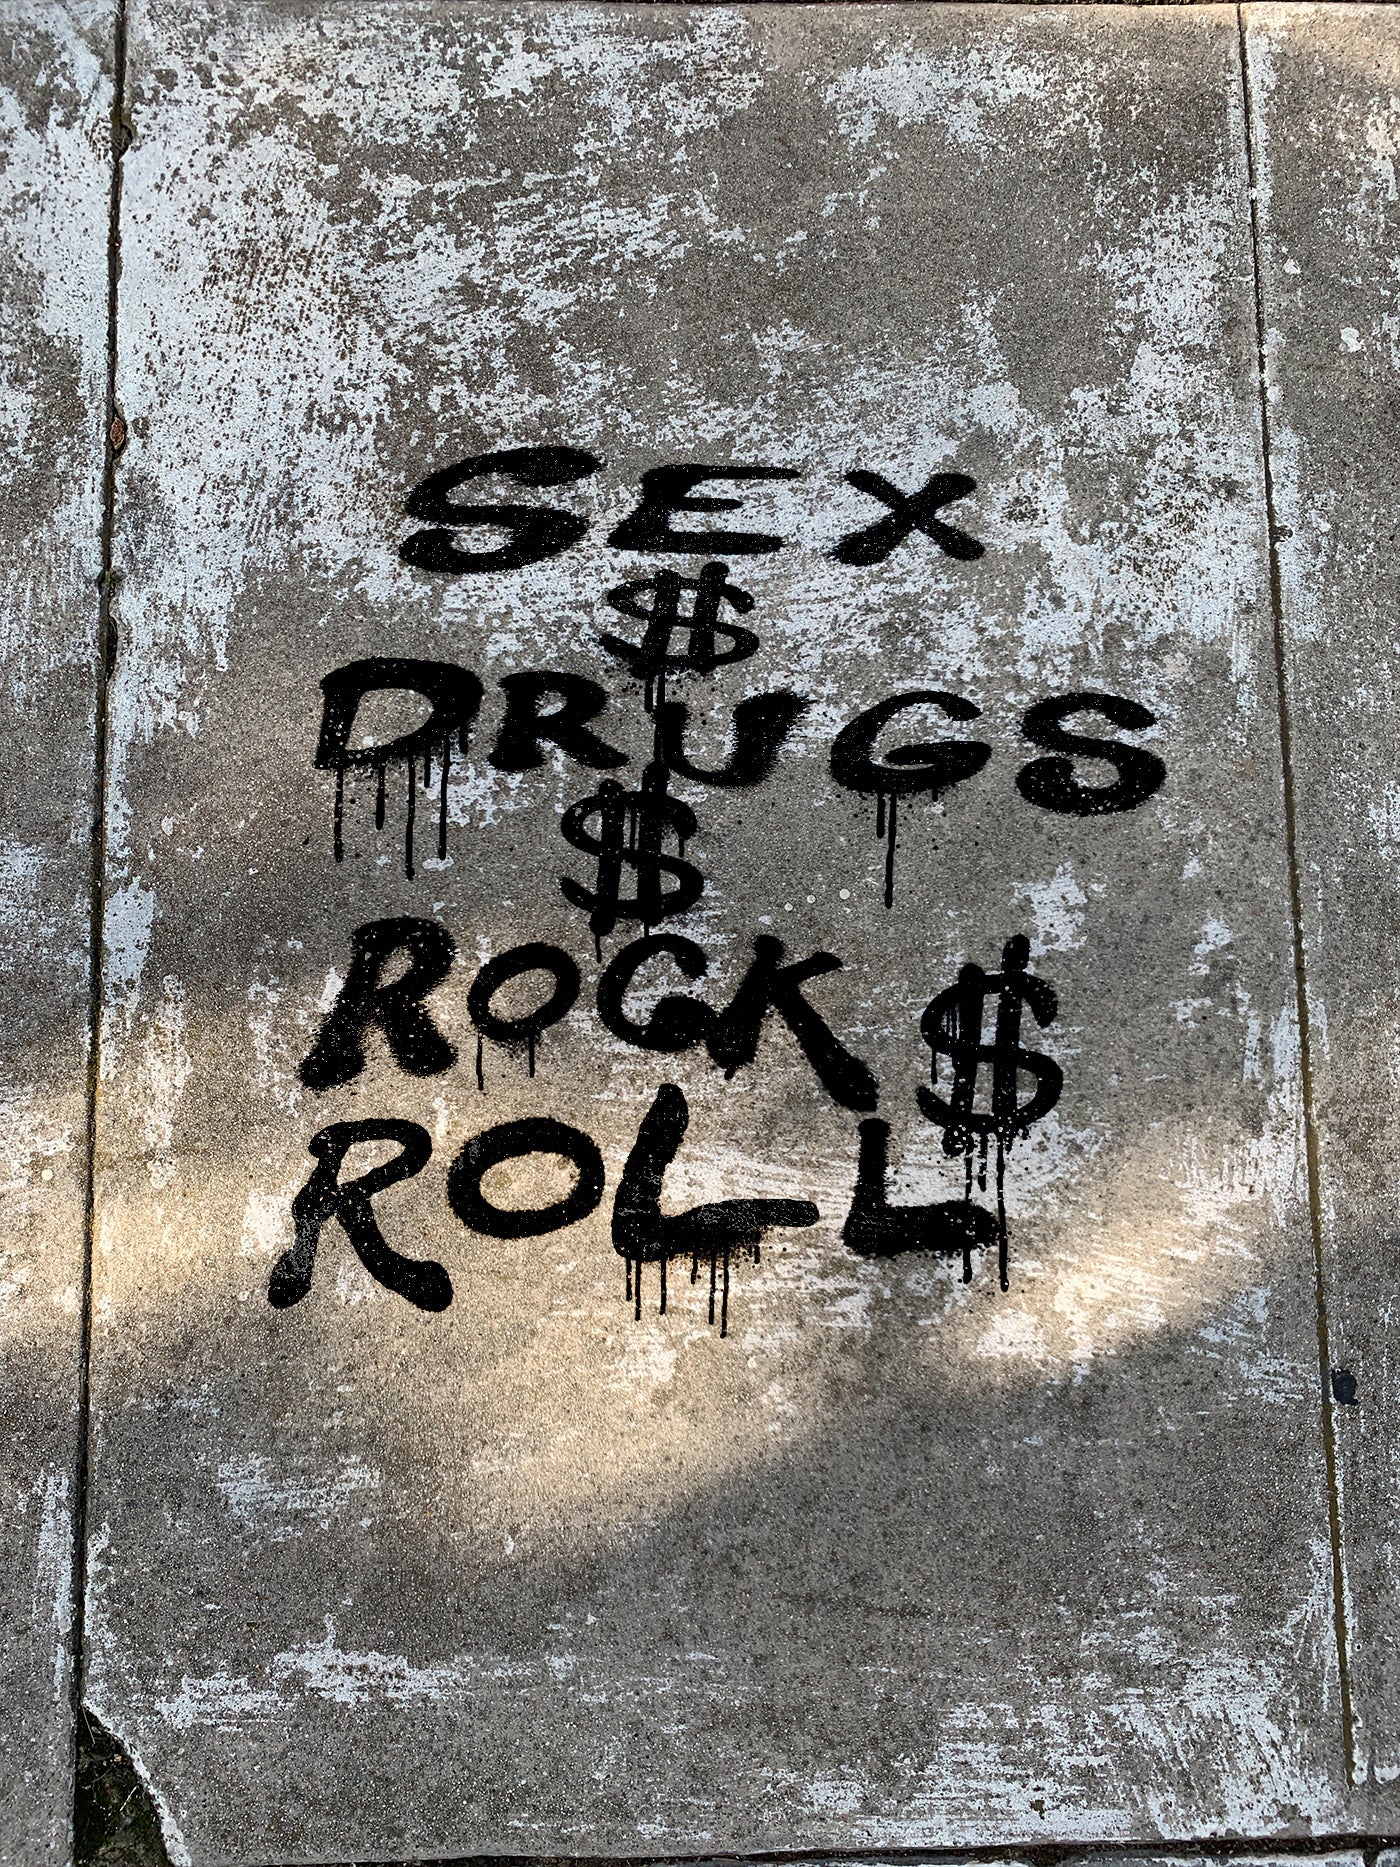 Embroidered T-Shirt - Sex & Drugs & Rock & Roll graphic